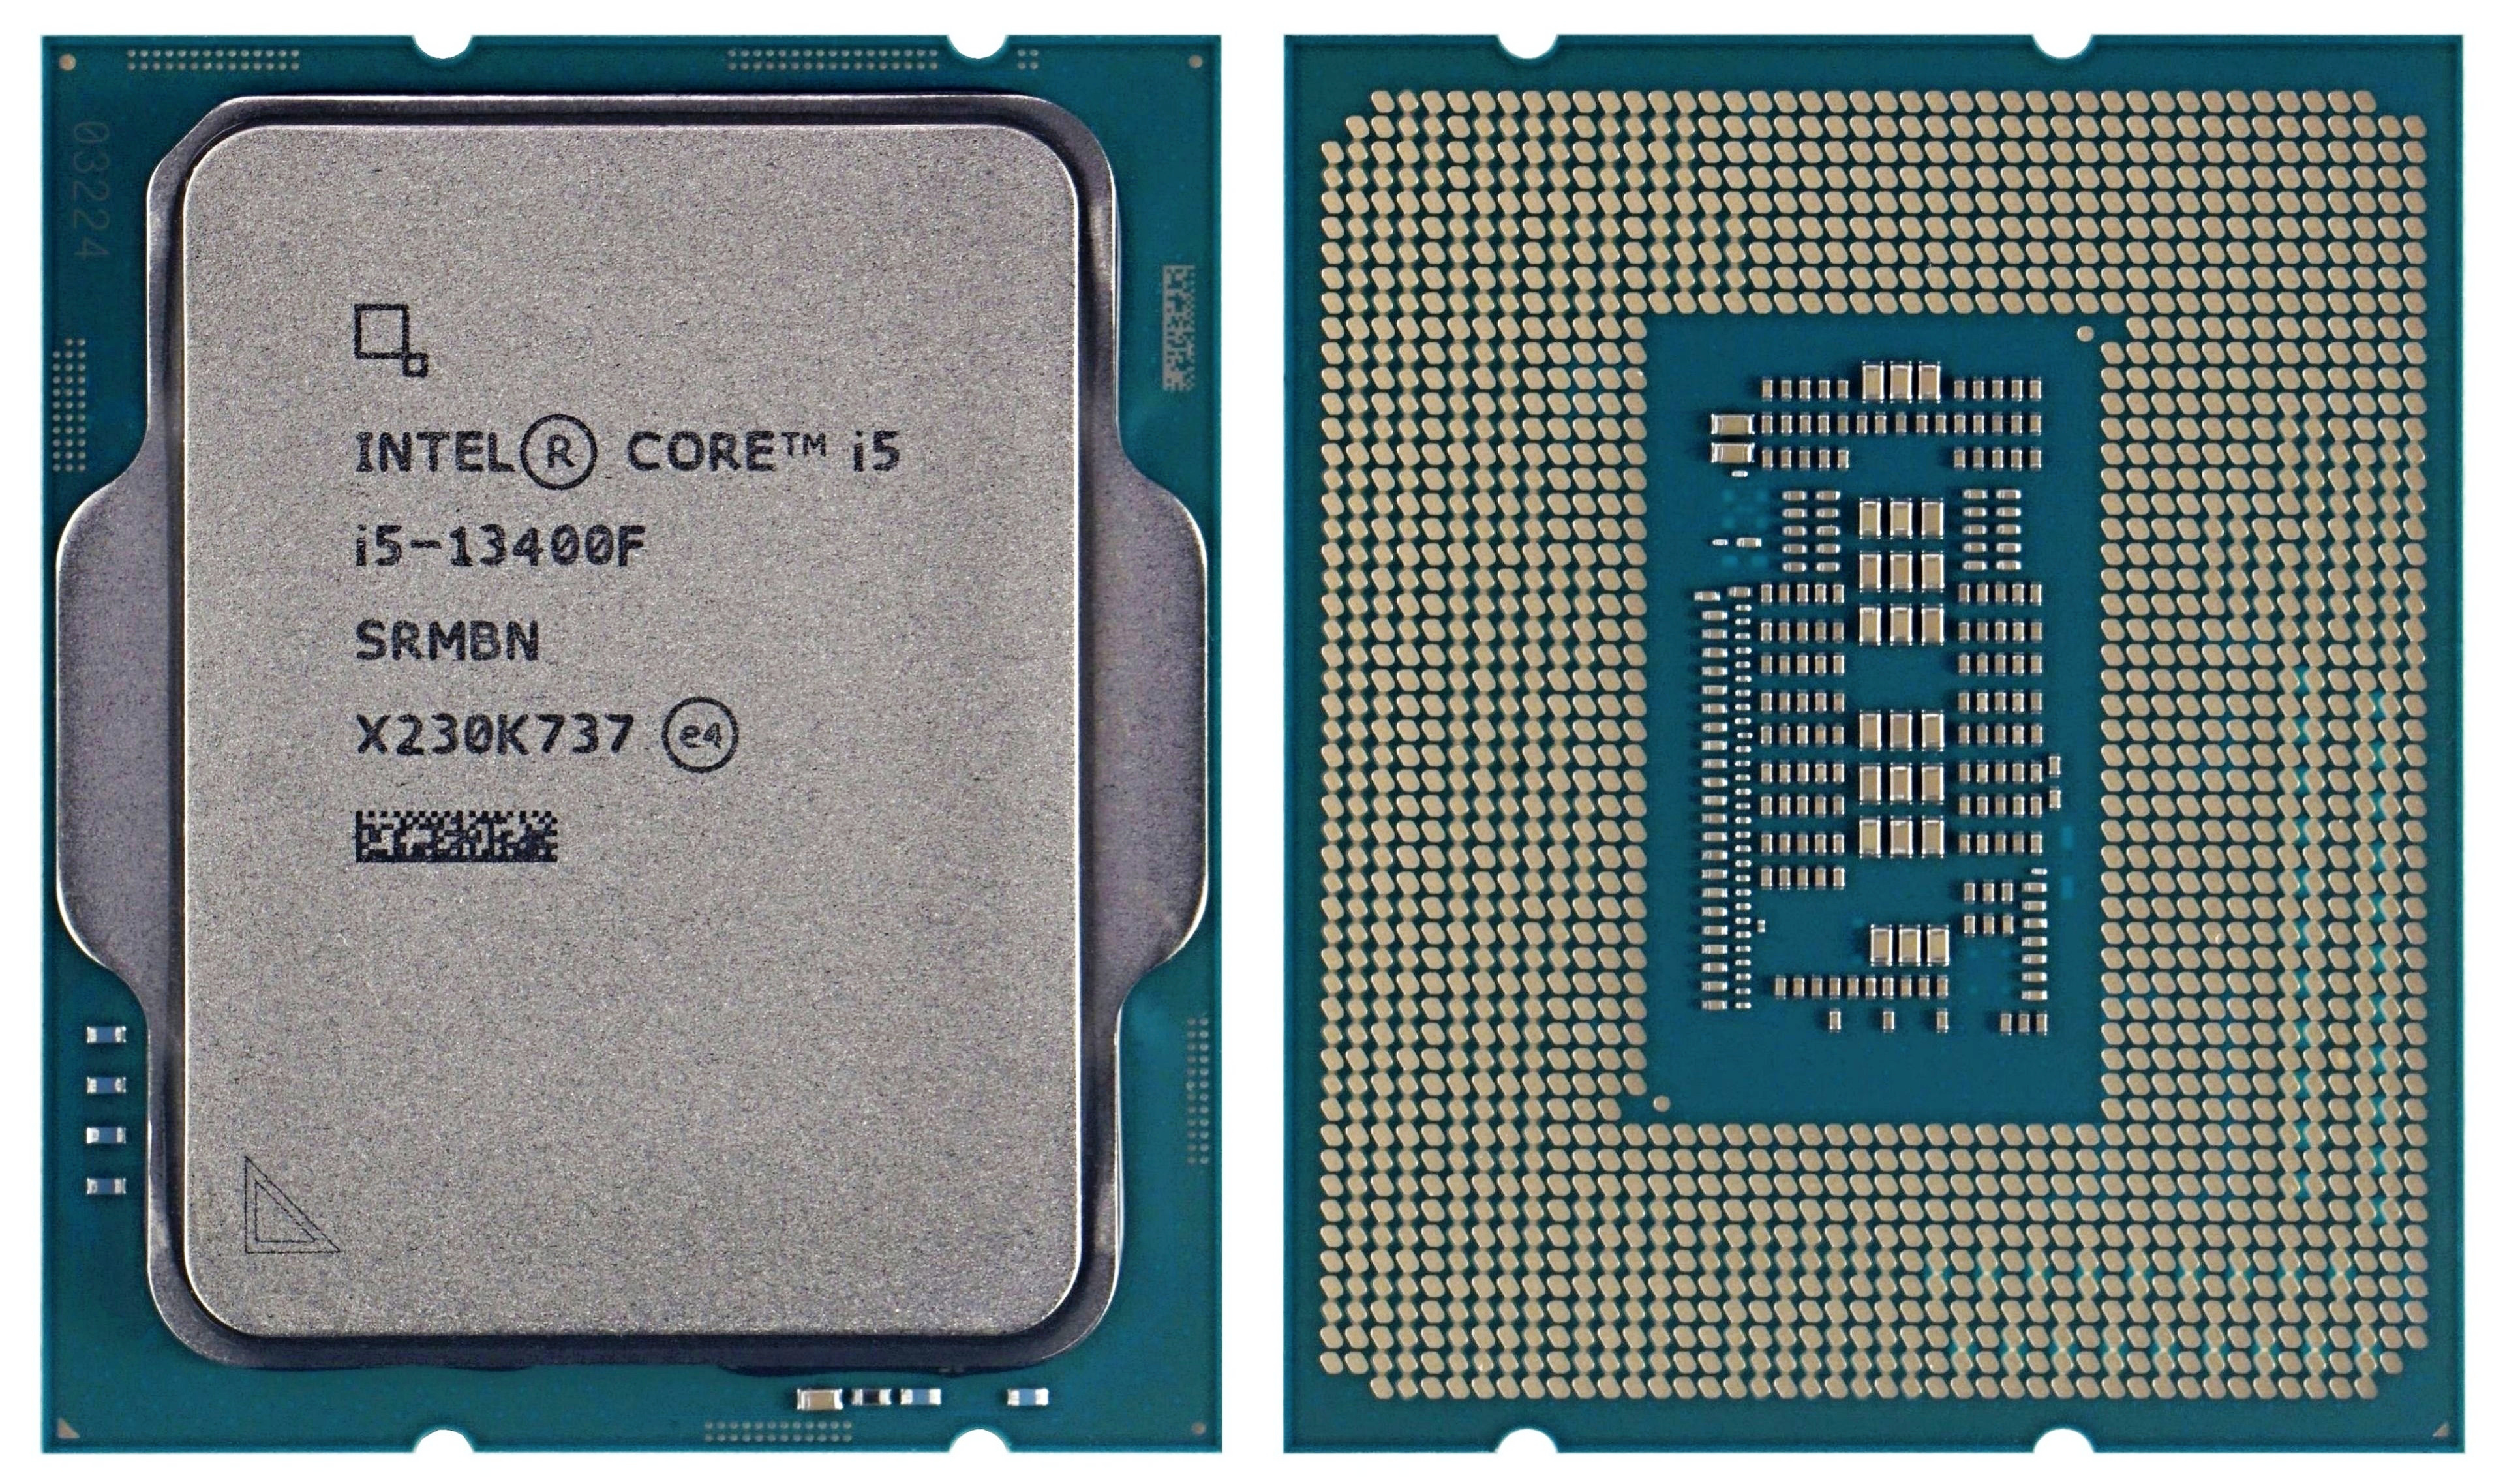 Intel Core i5-13400 Faster than the AMD Ryzen 7 7600X in Gaming